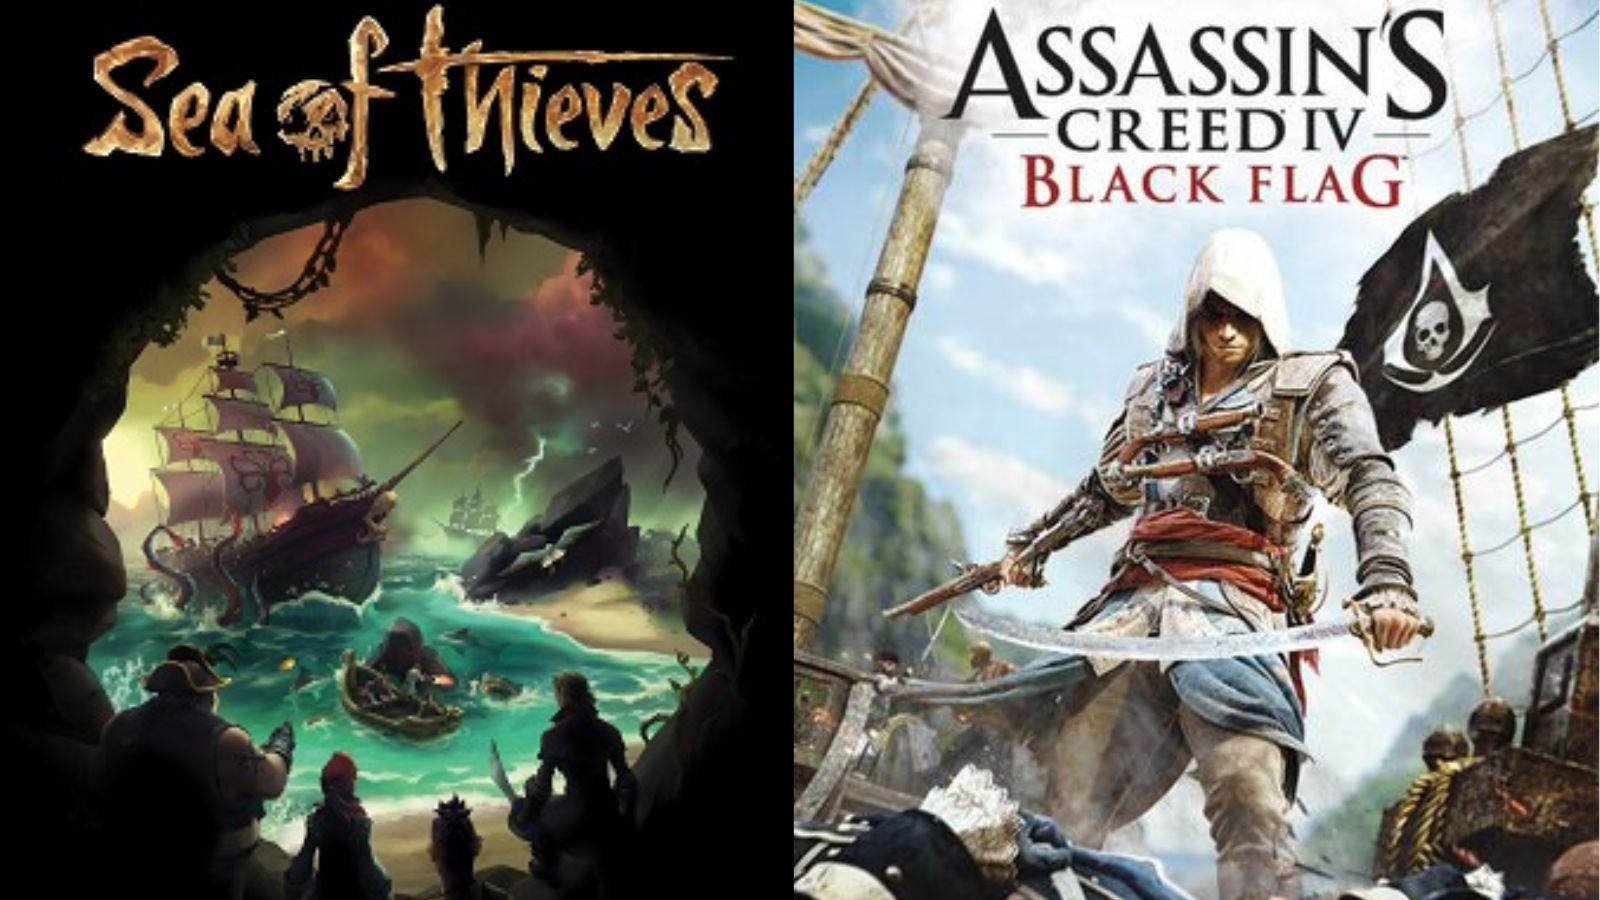 Play it safe: 5 reasons not to download pirated games